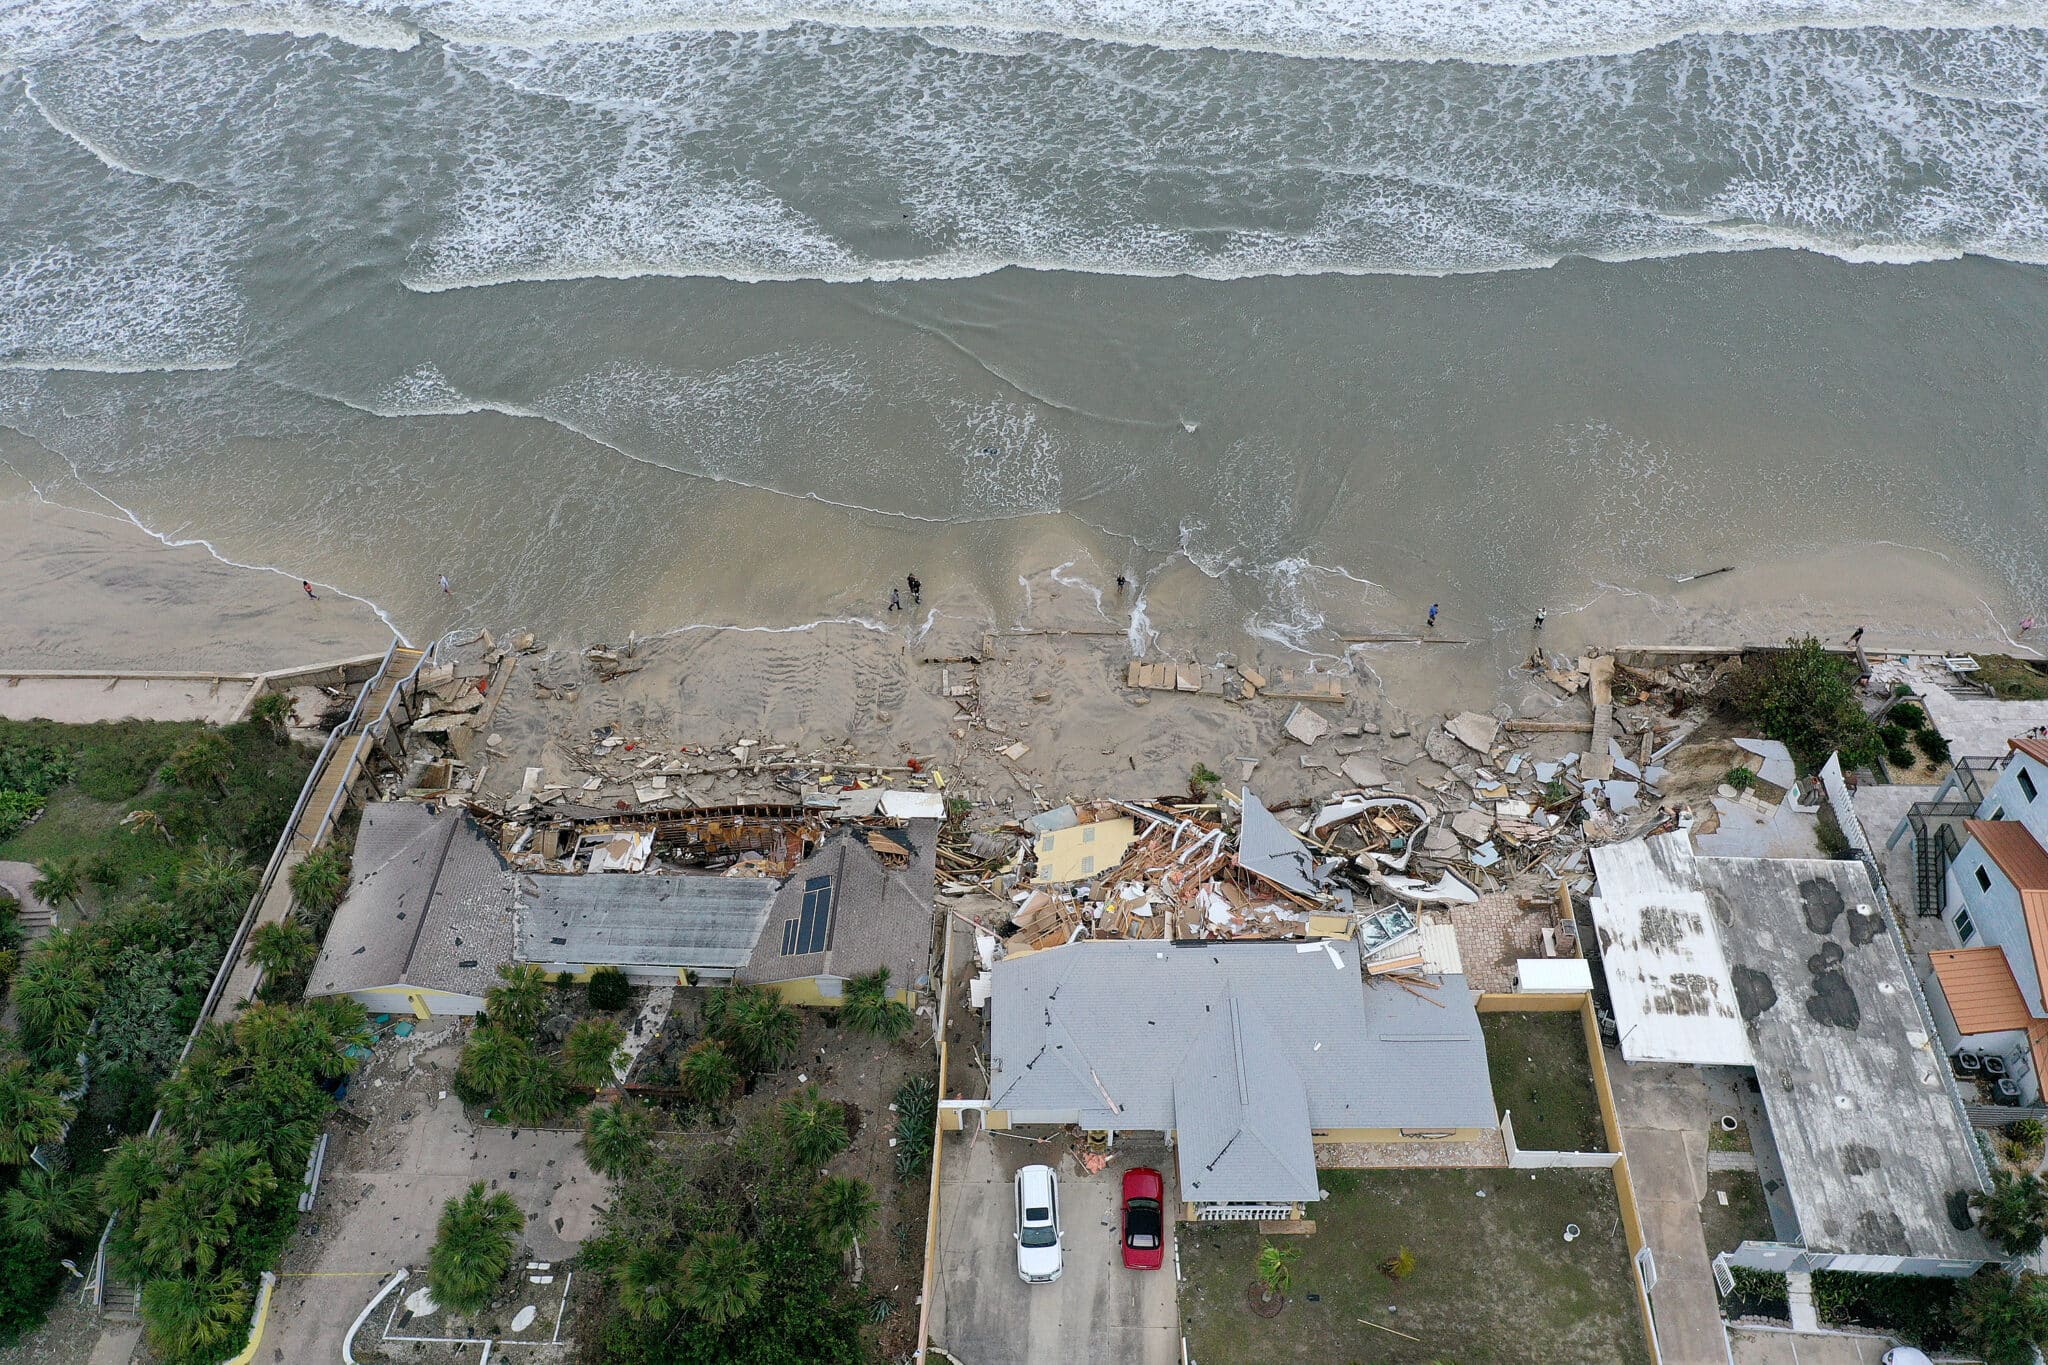 DAYTONA BEACH, FLORIDA - NOVEMBER 10: In this aerial view, homes are partially toppled onto the beach after Hurricane Nicole came ashore on November 10, 2022 in Daytona Beach, Florida. Nicole came ashore as a Category 1 hurricane before weakening to a tropical storm as it moved across the state. (Photo by Joe Raedle/Getty Images)